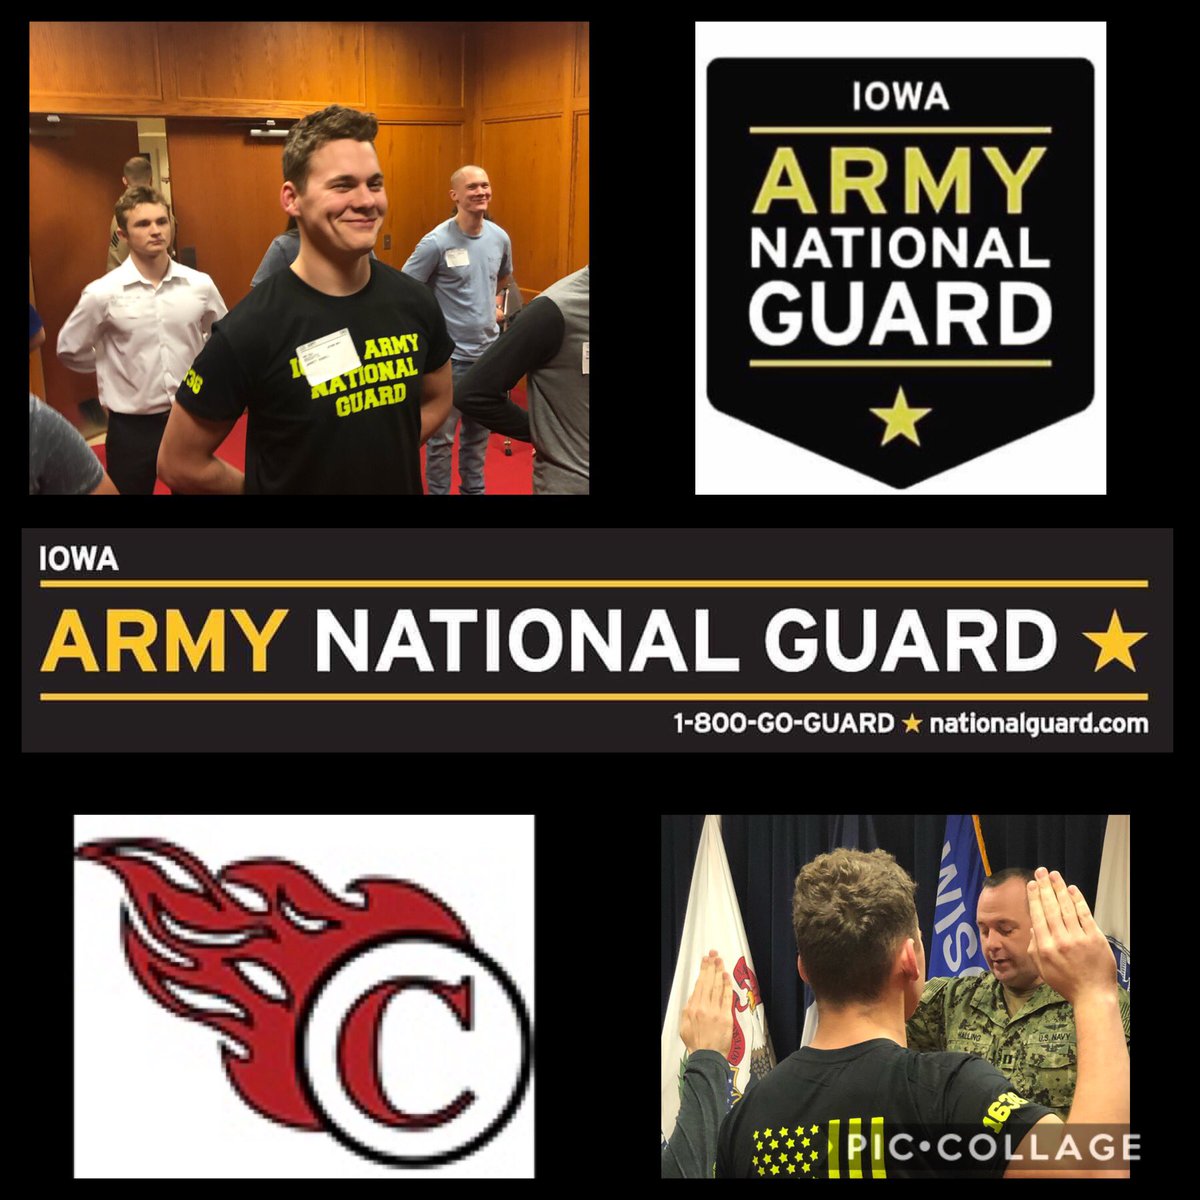 Congratulations to Jarrett Knights for enlisting into the Iowa National Guard!  Thank you for stepping up and serving your Community and Country!
.
.
.
#iowanationalguard #goguardiowa